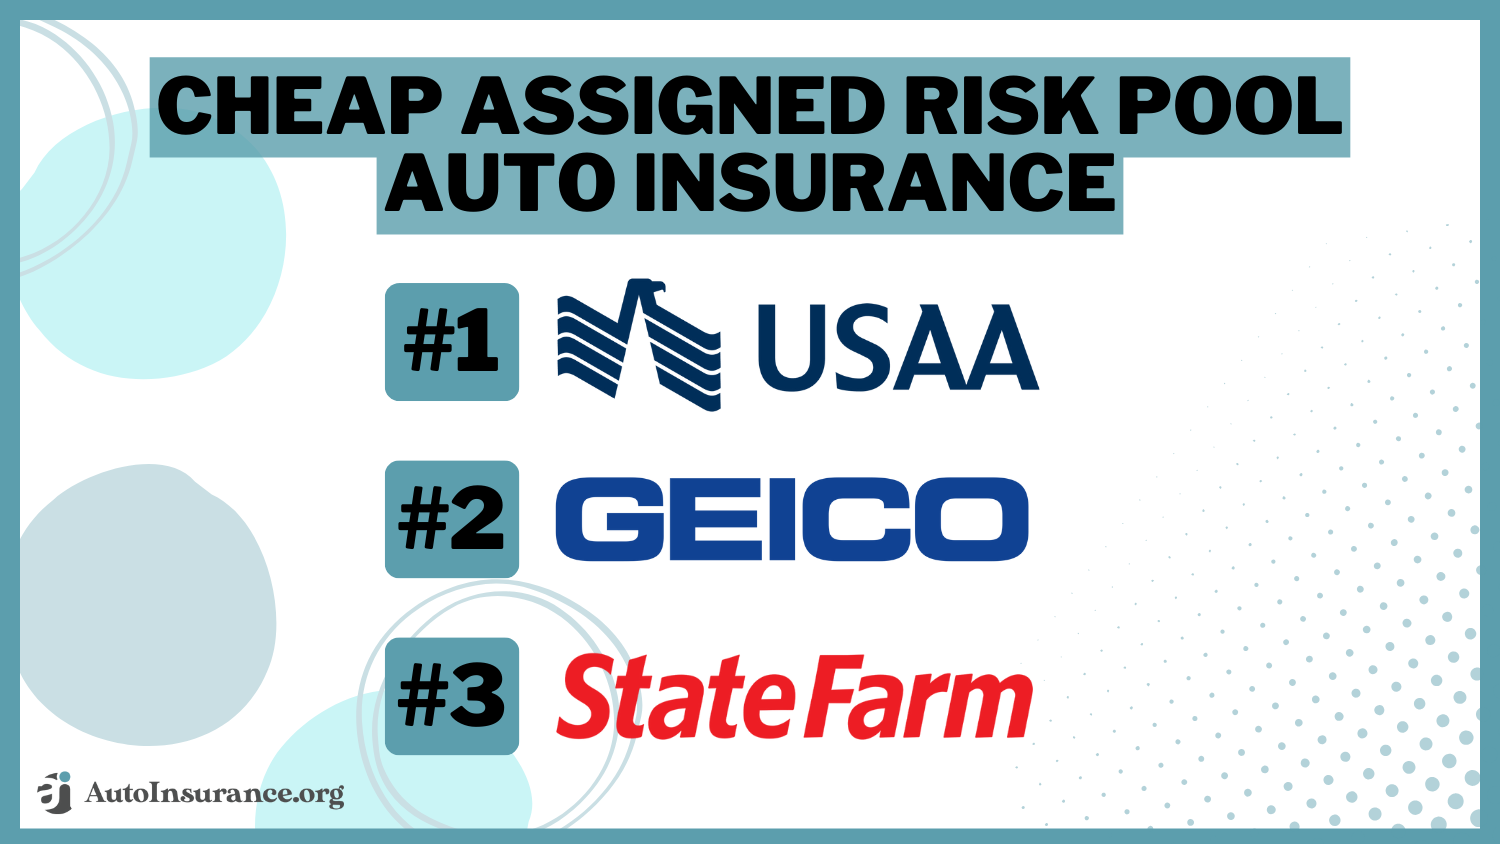 Cheap Assigned Risk Pool Auto Insurance: USAA, Geico, State Farm